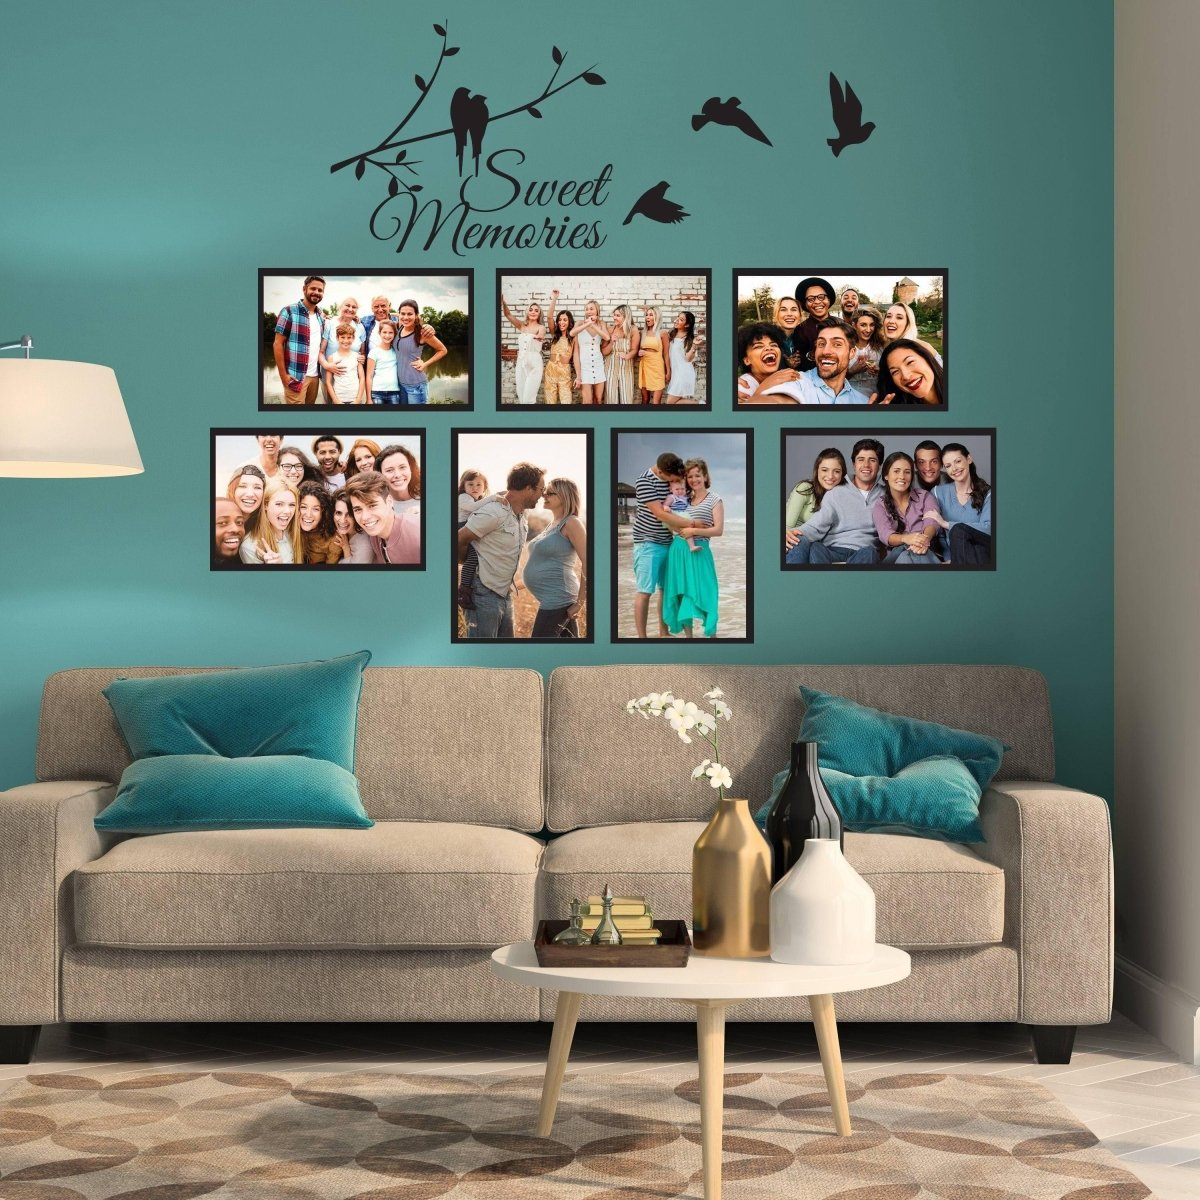 Vinyl Wall Decal - Stylish and Sophisticated Frames Design